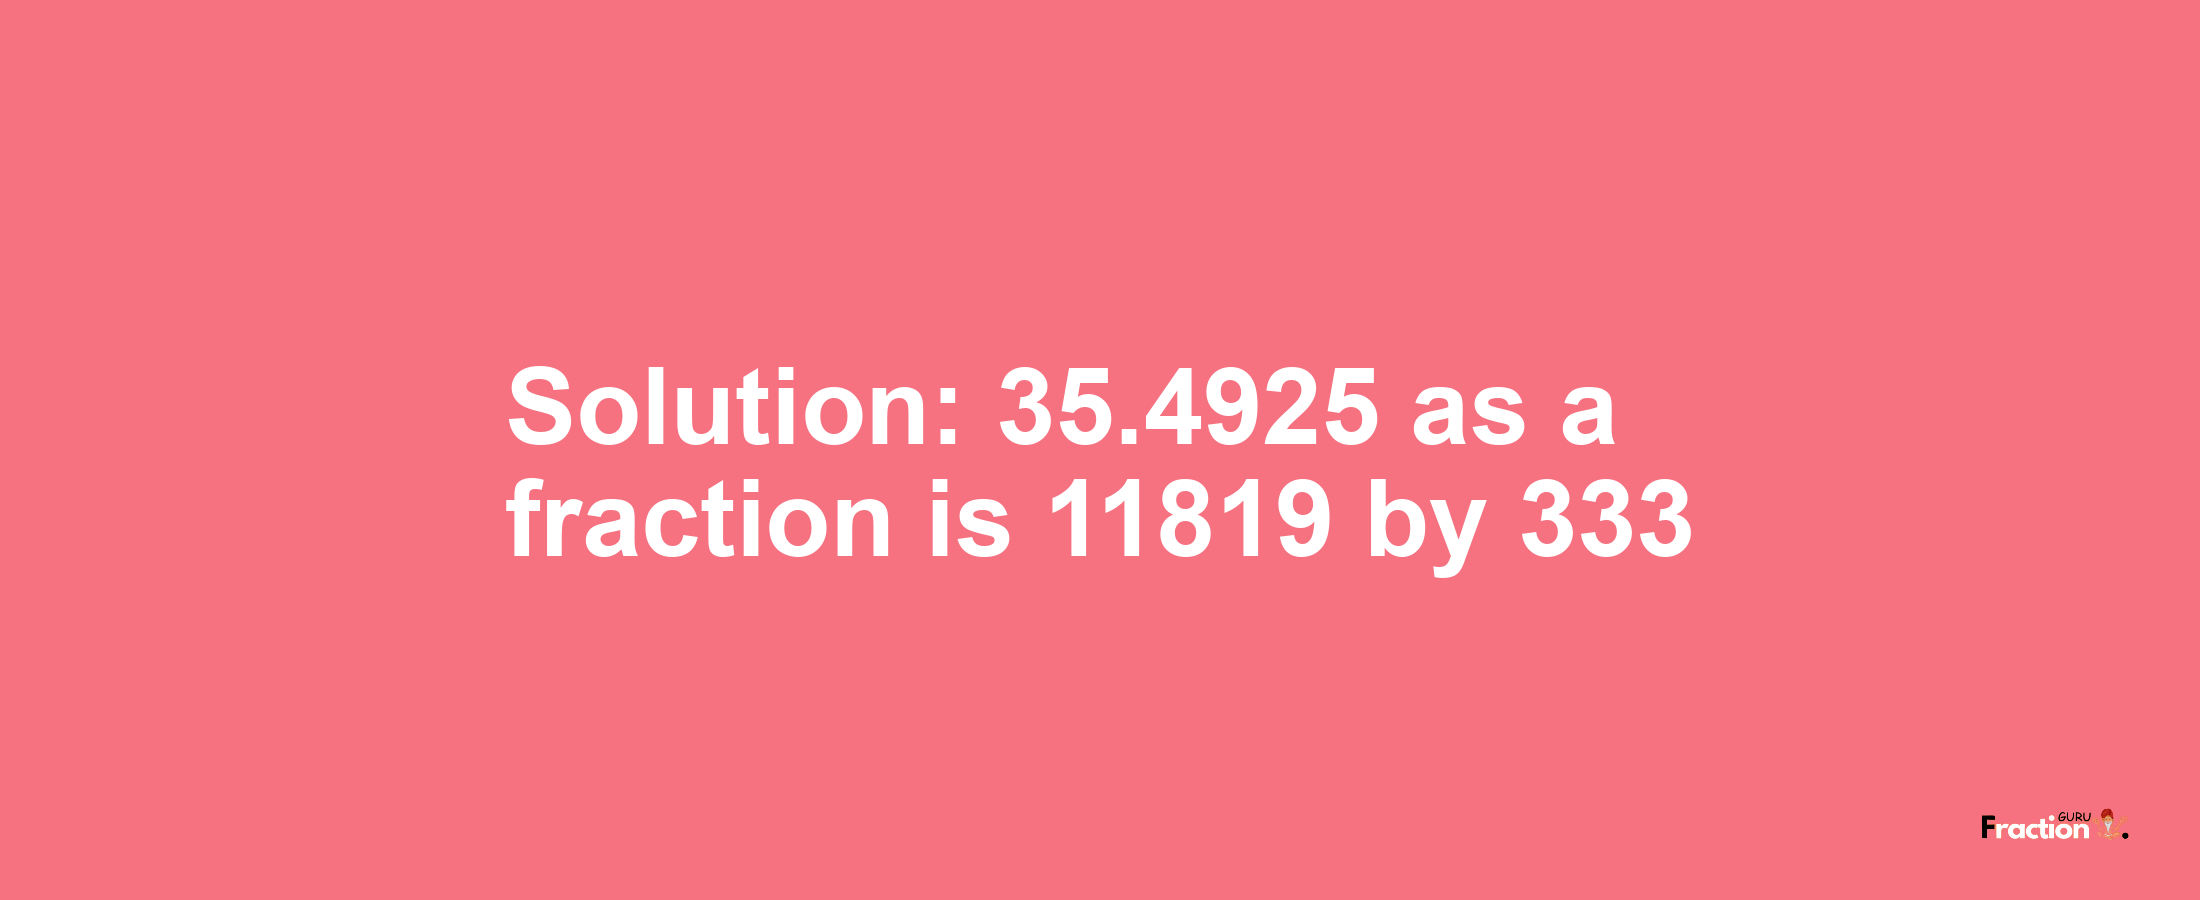 Solution:35.4925 as a fraction is 11819/333